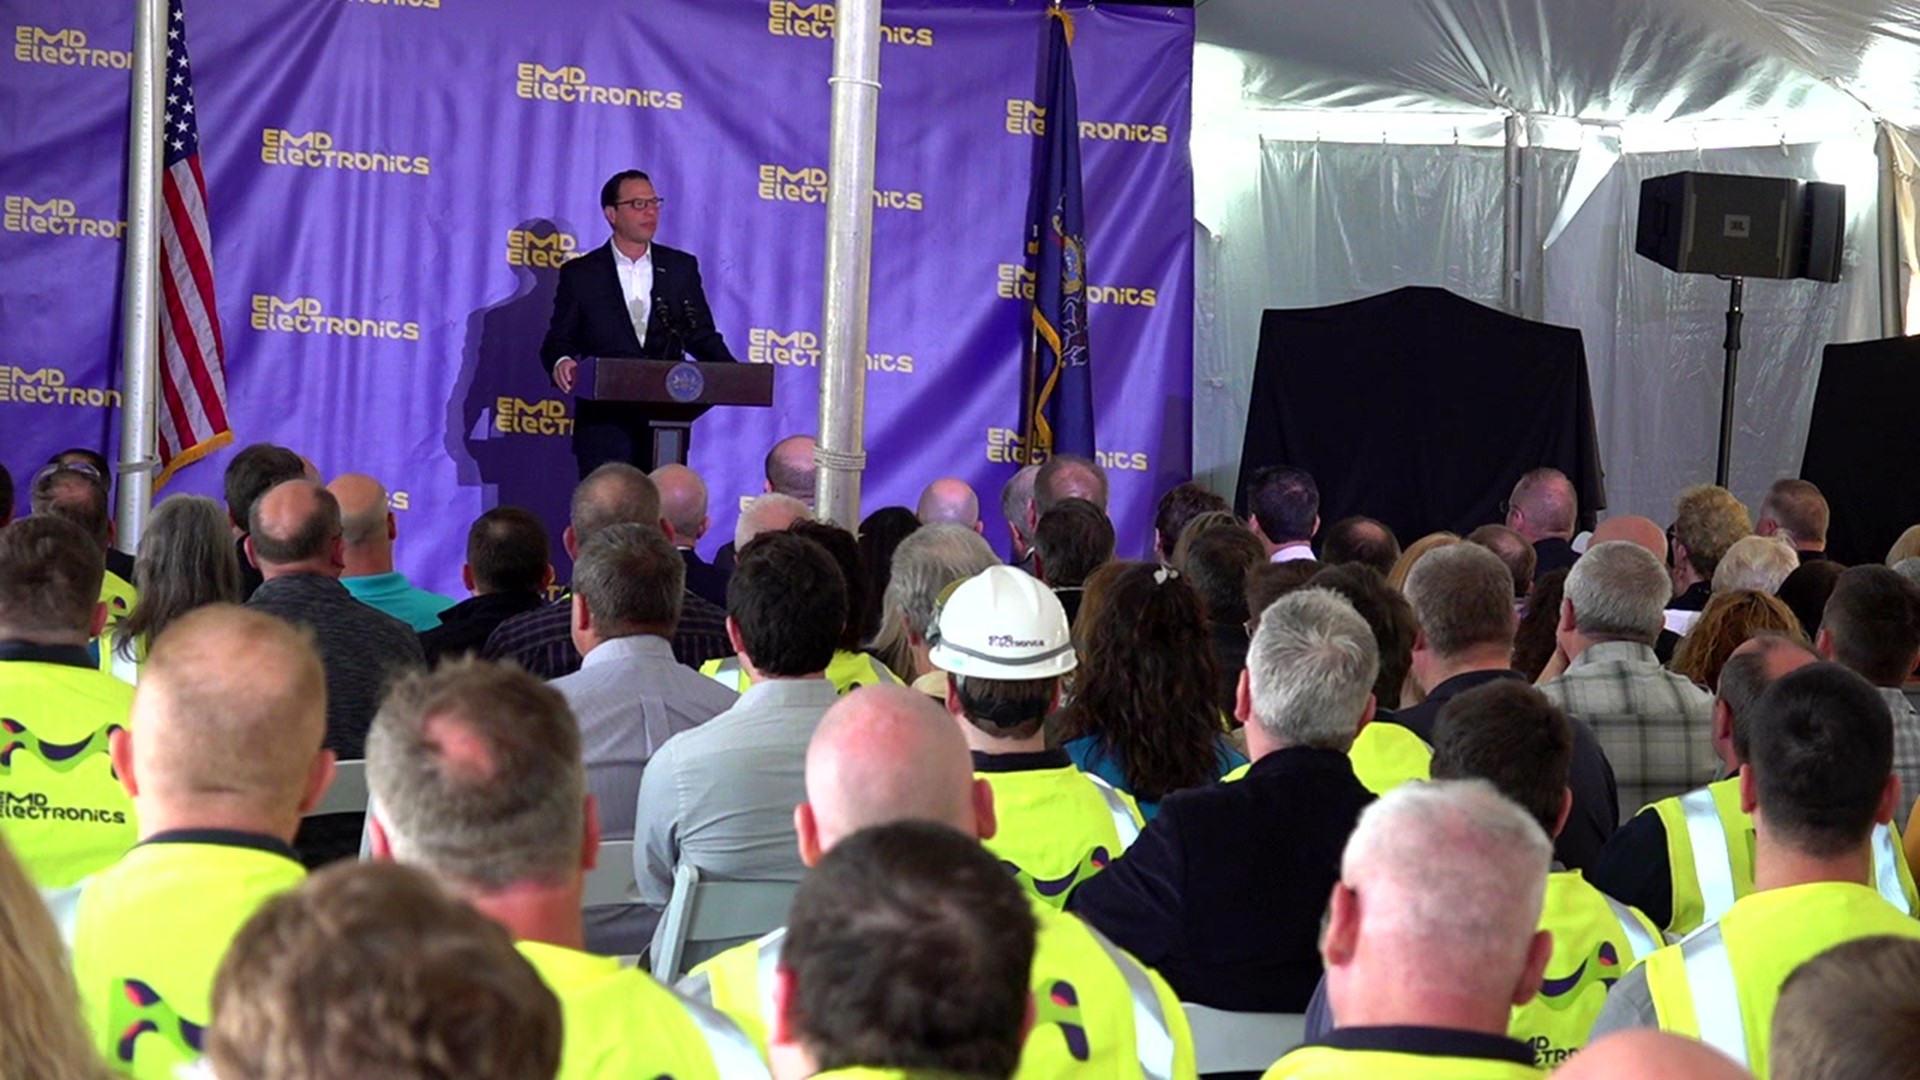 The governor came to break ground for what's being called the world's largest integrated specialty gases facility.